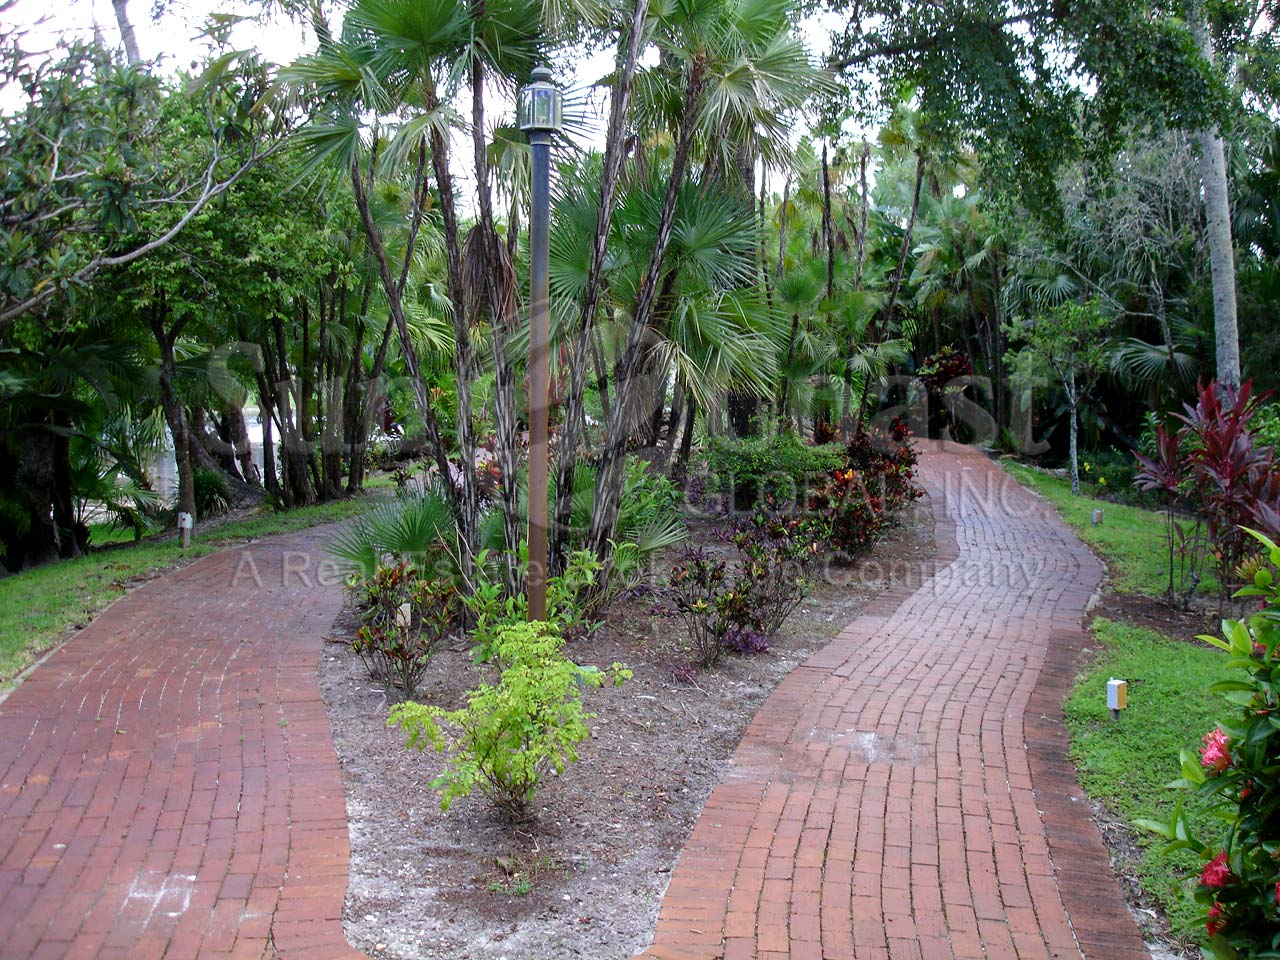 Rosewood Community Paths